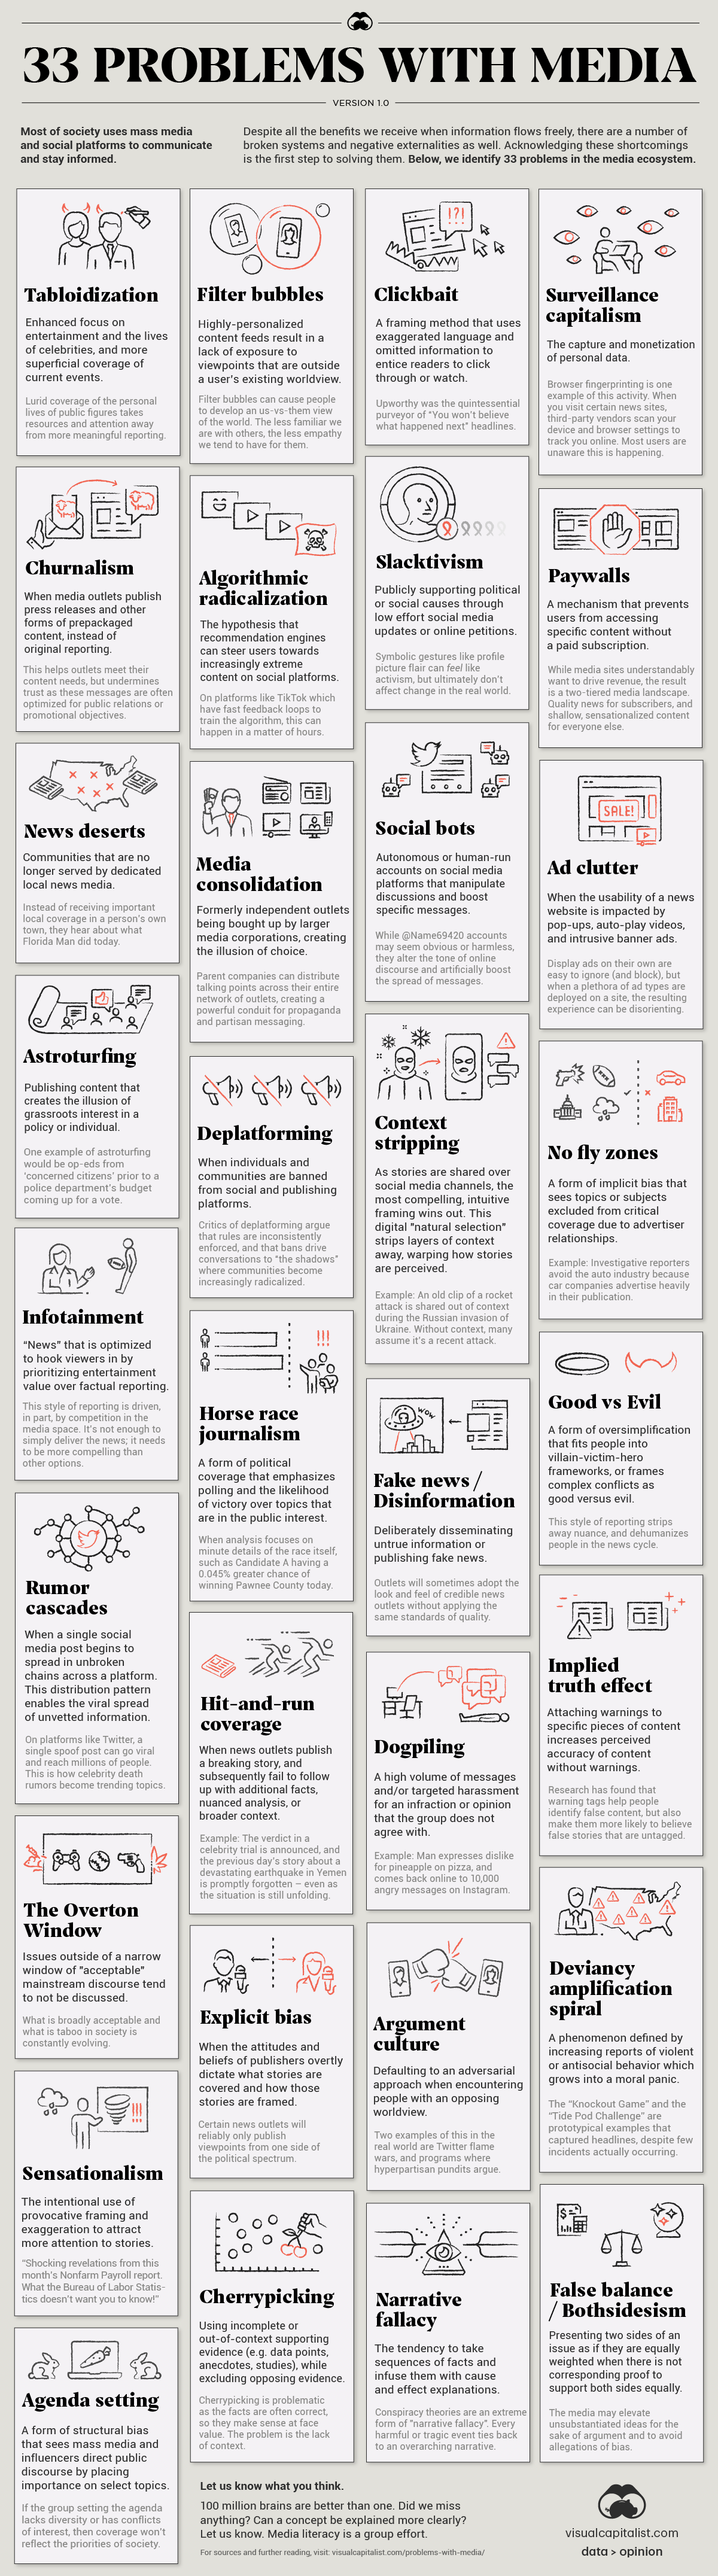 infographic listing problems with media, including bias, sensationalism, and more